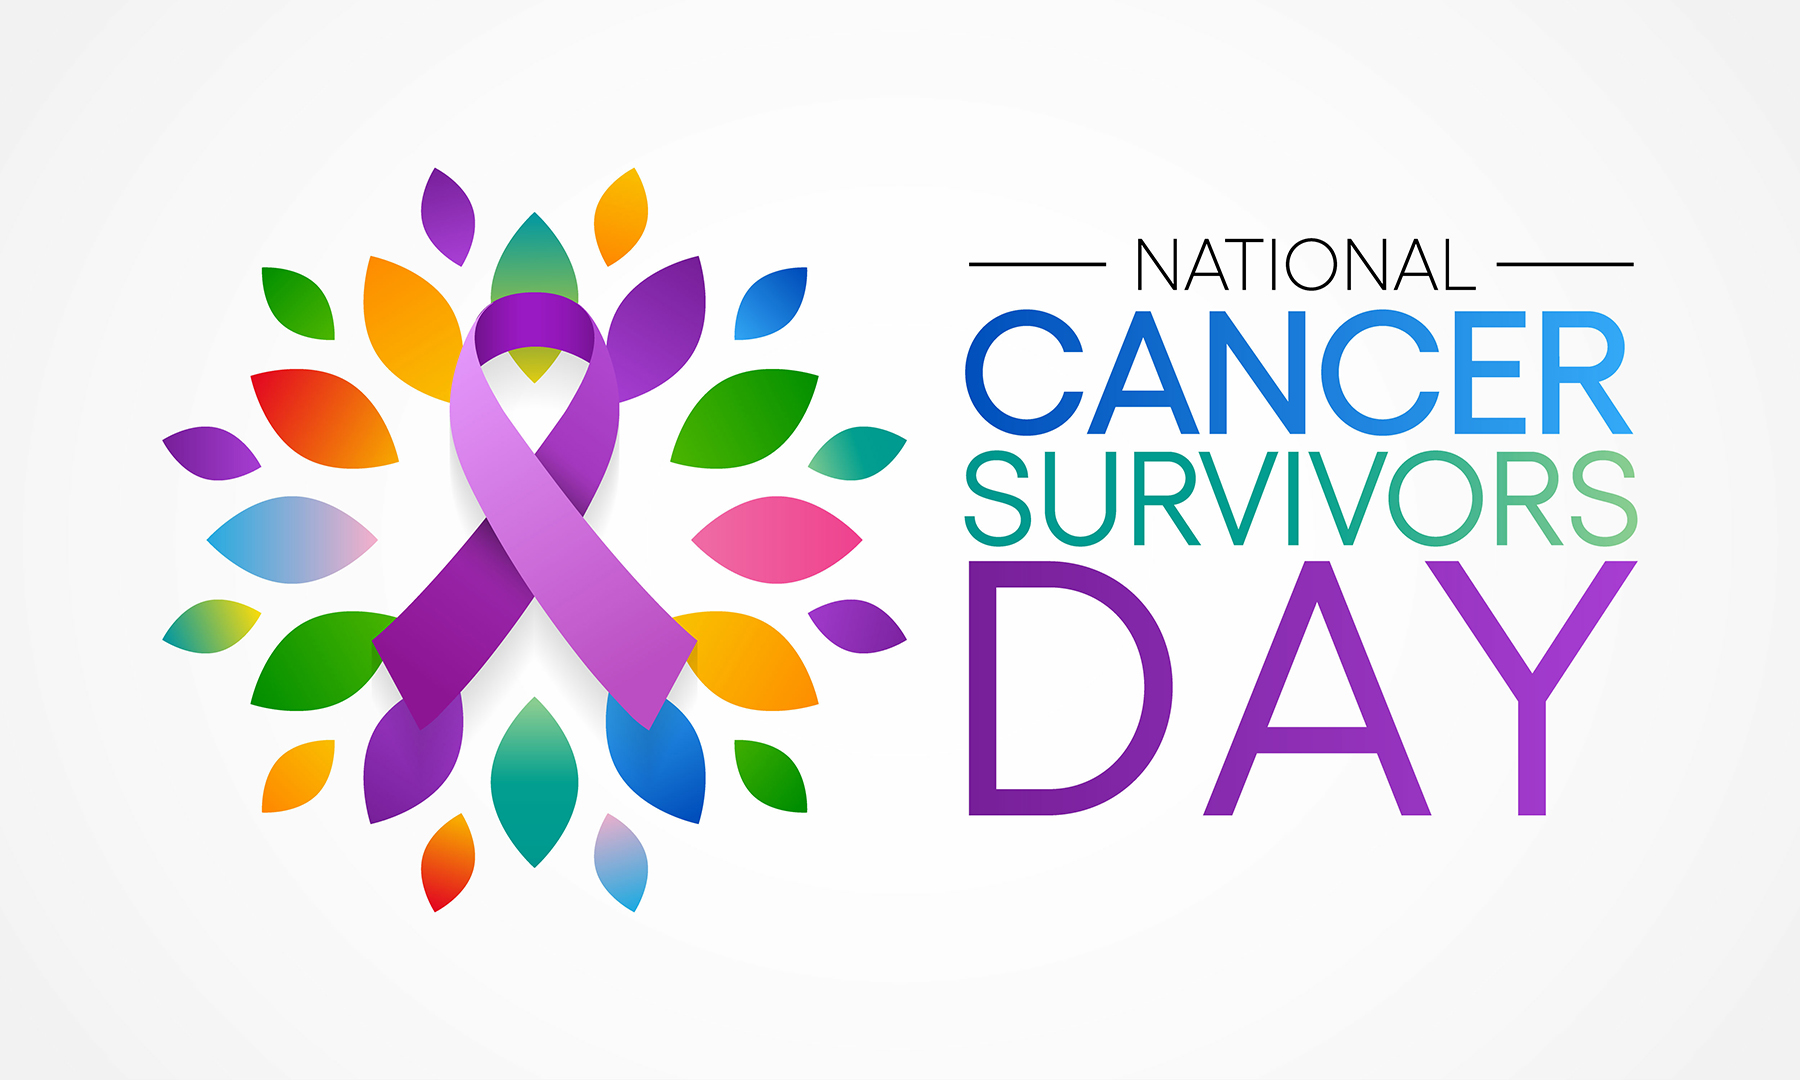 National Cancer survivors day is observed every year in June, it